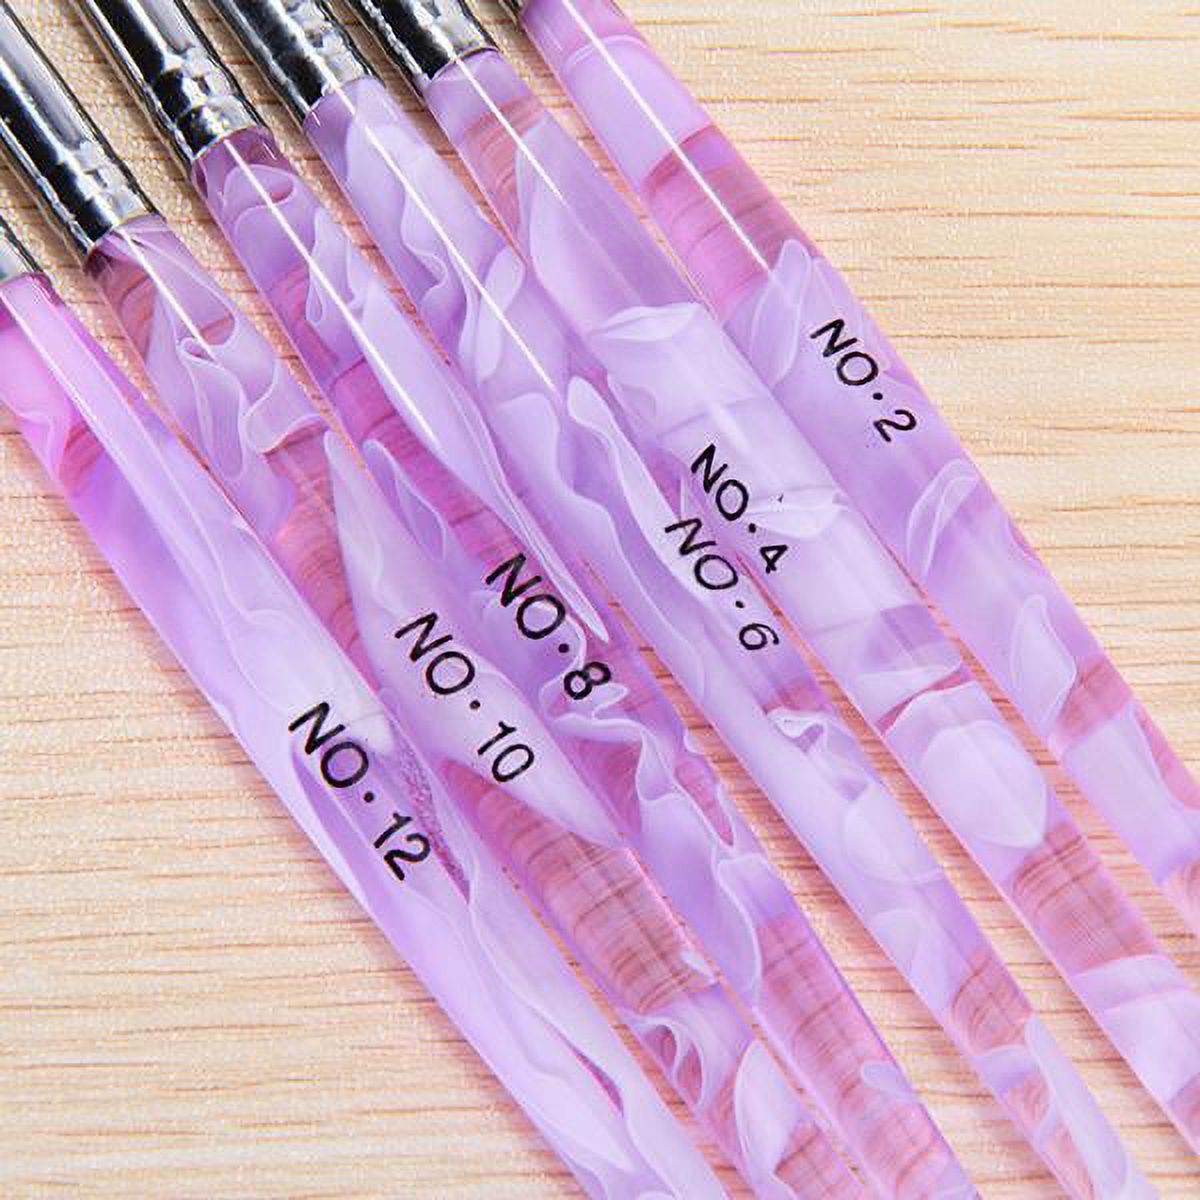 Set Of S Assorted Sizes Acrylic Nail Art Brush Manicure Equipment Beauty Supplies Cosmetic Tool Light Lavender - image 3 of 7